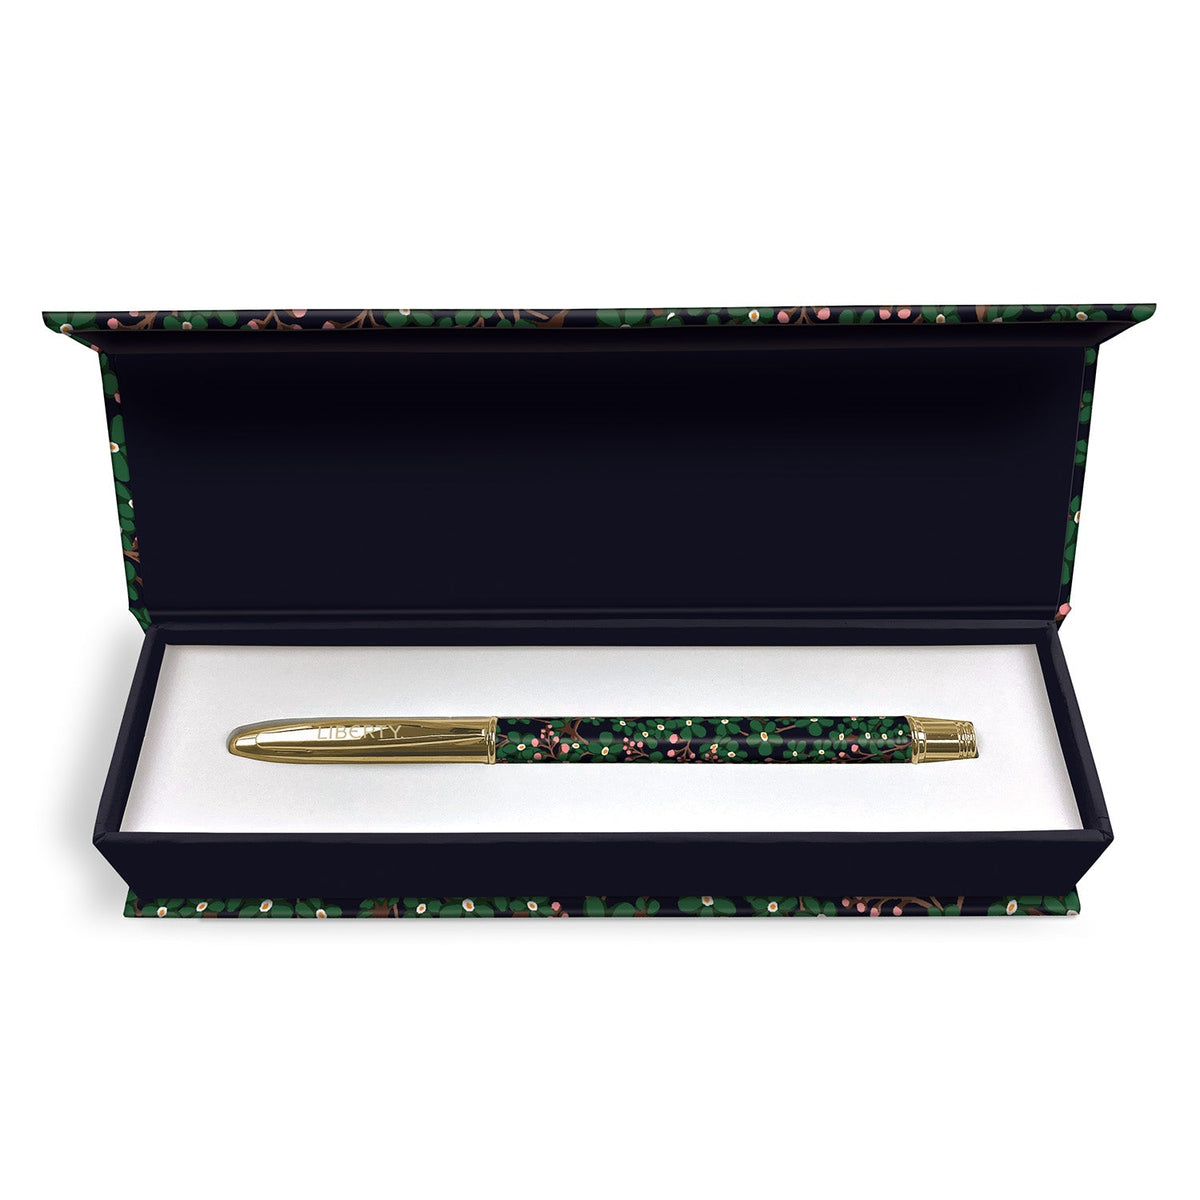 Liberty Star Anise Boxed Pen Galison 